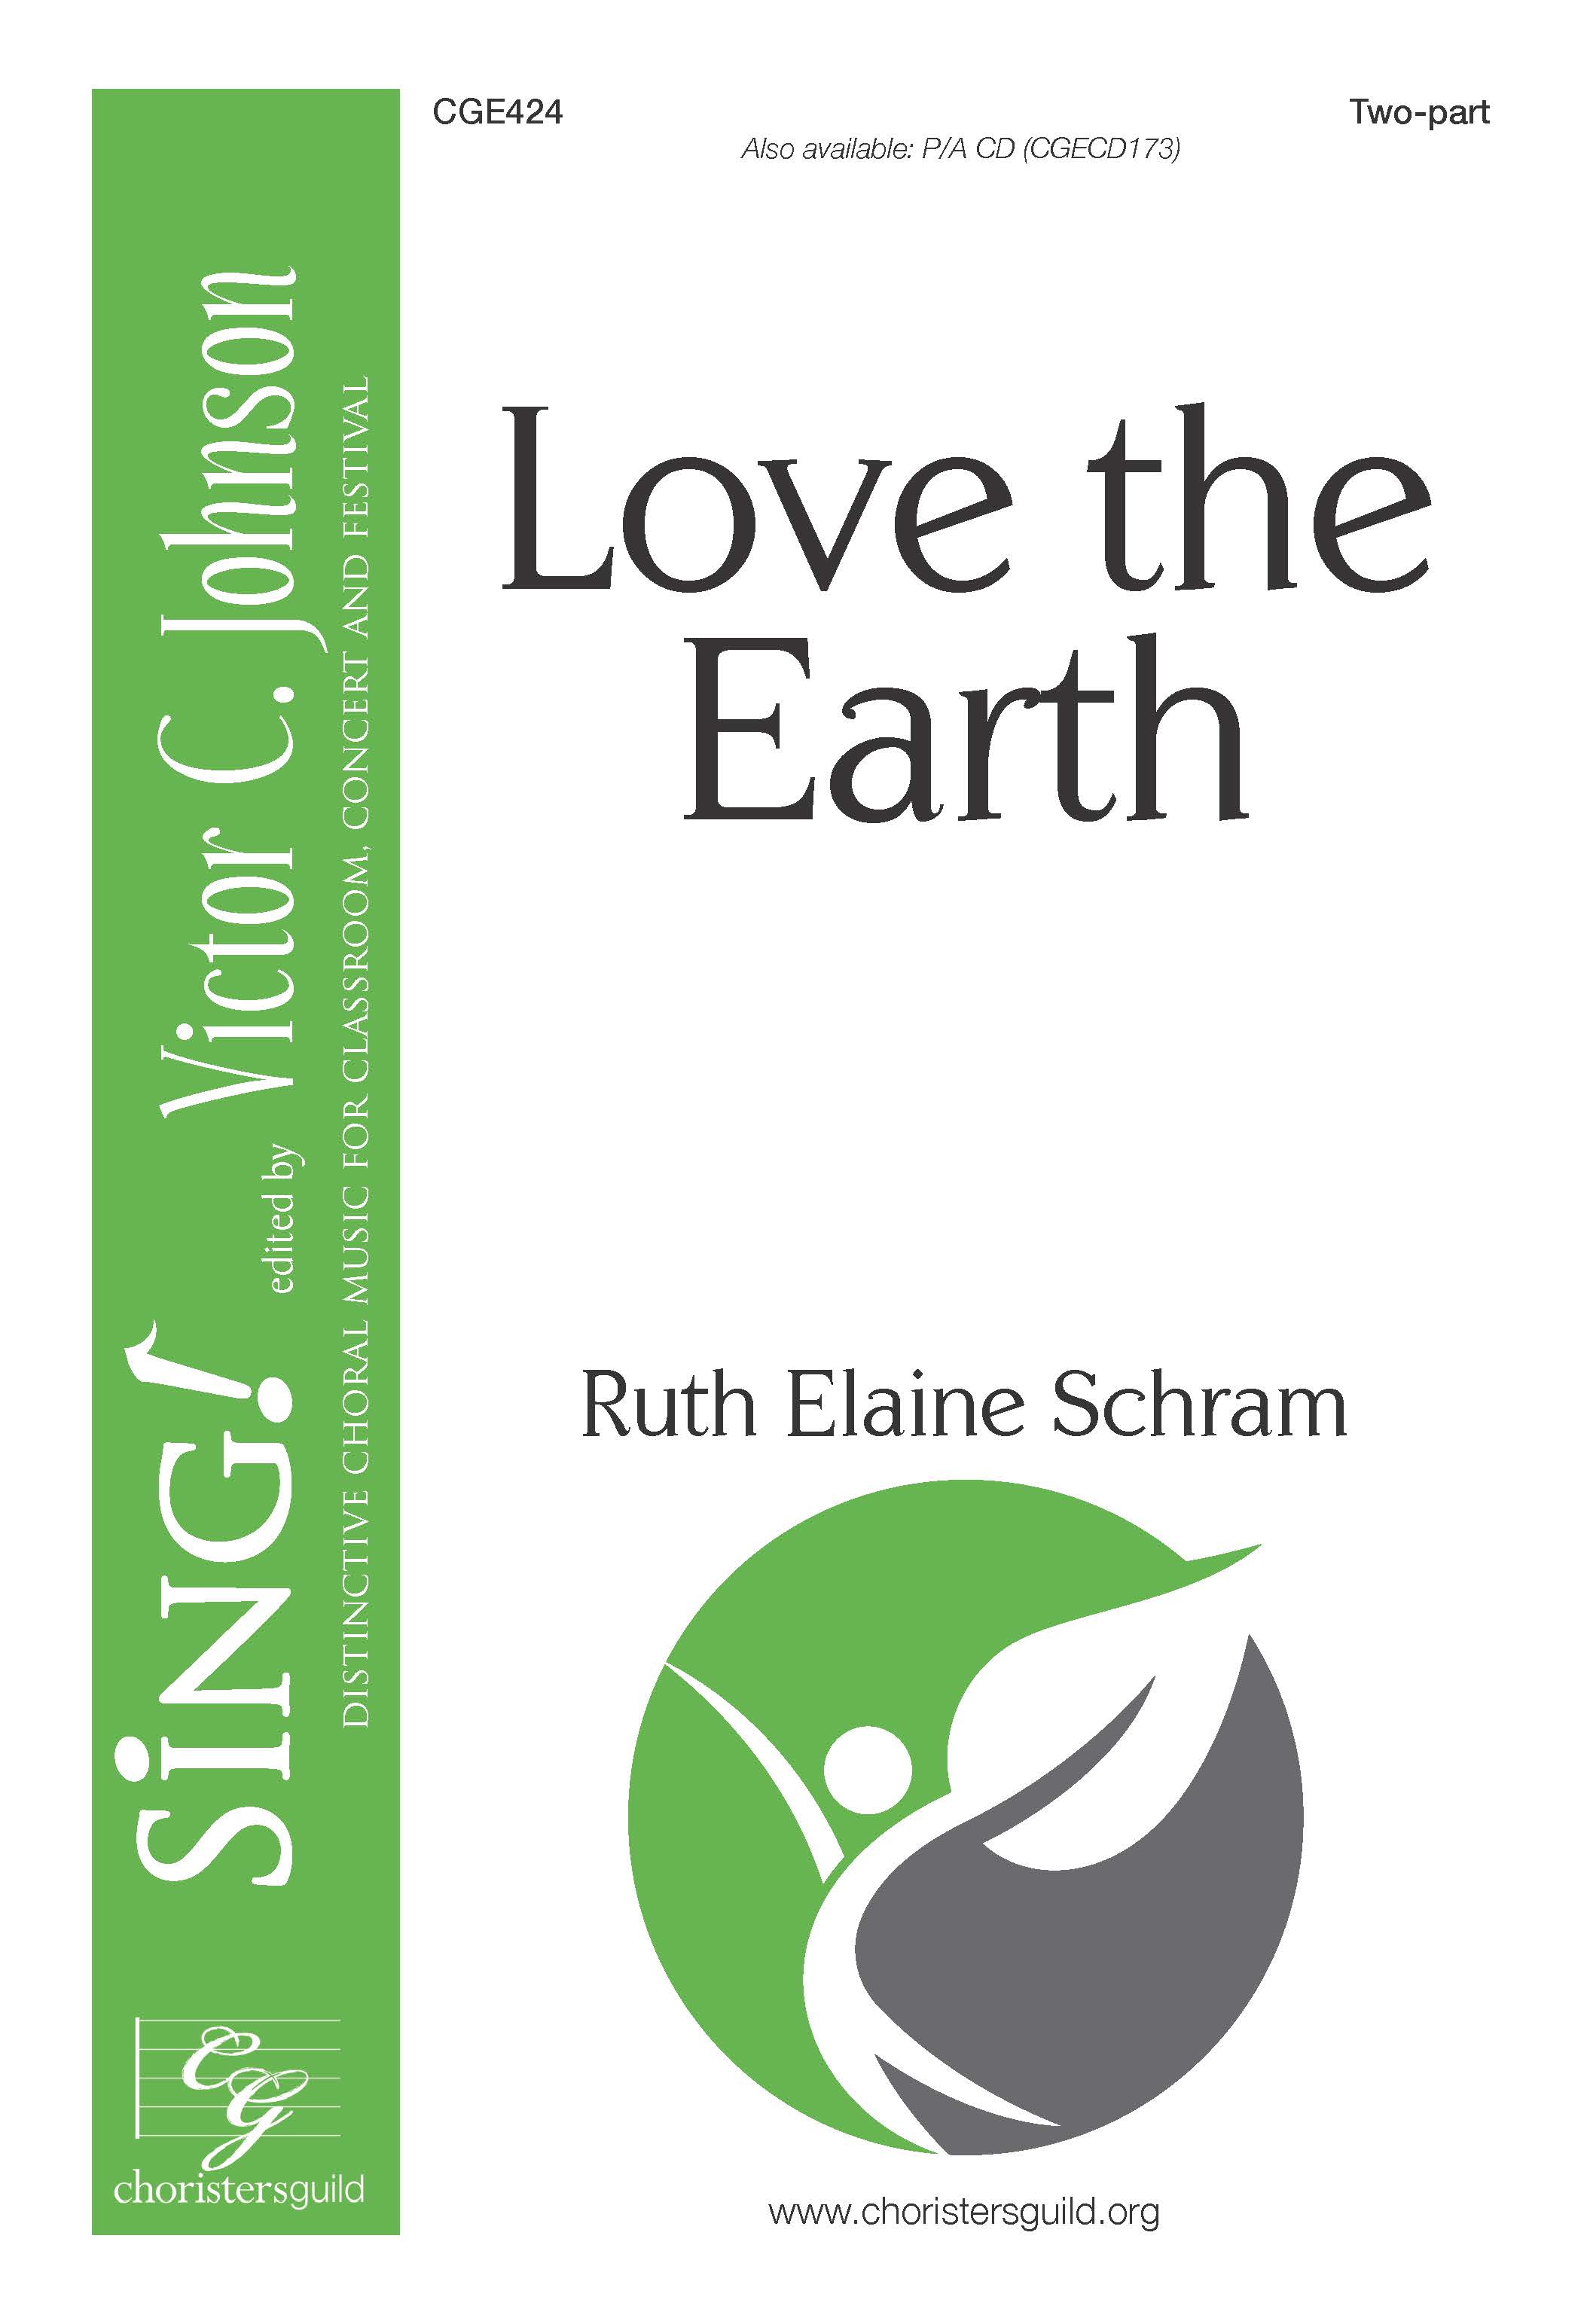 Love the Earth - Two-part